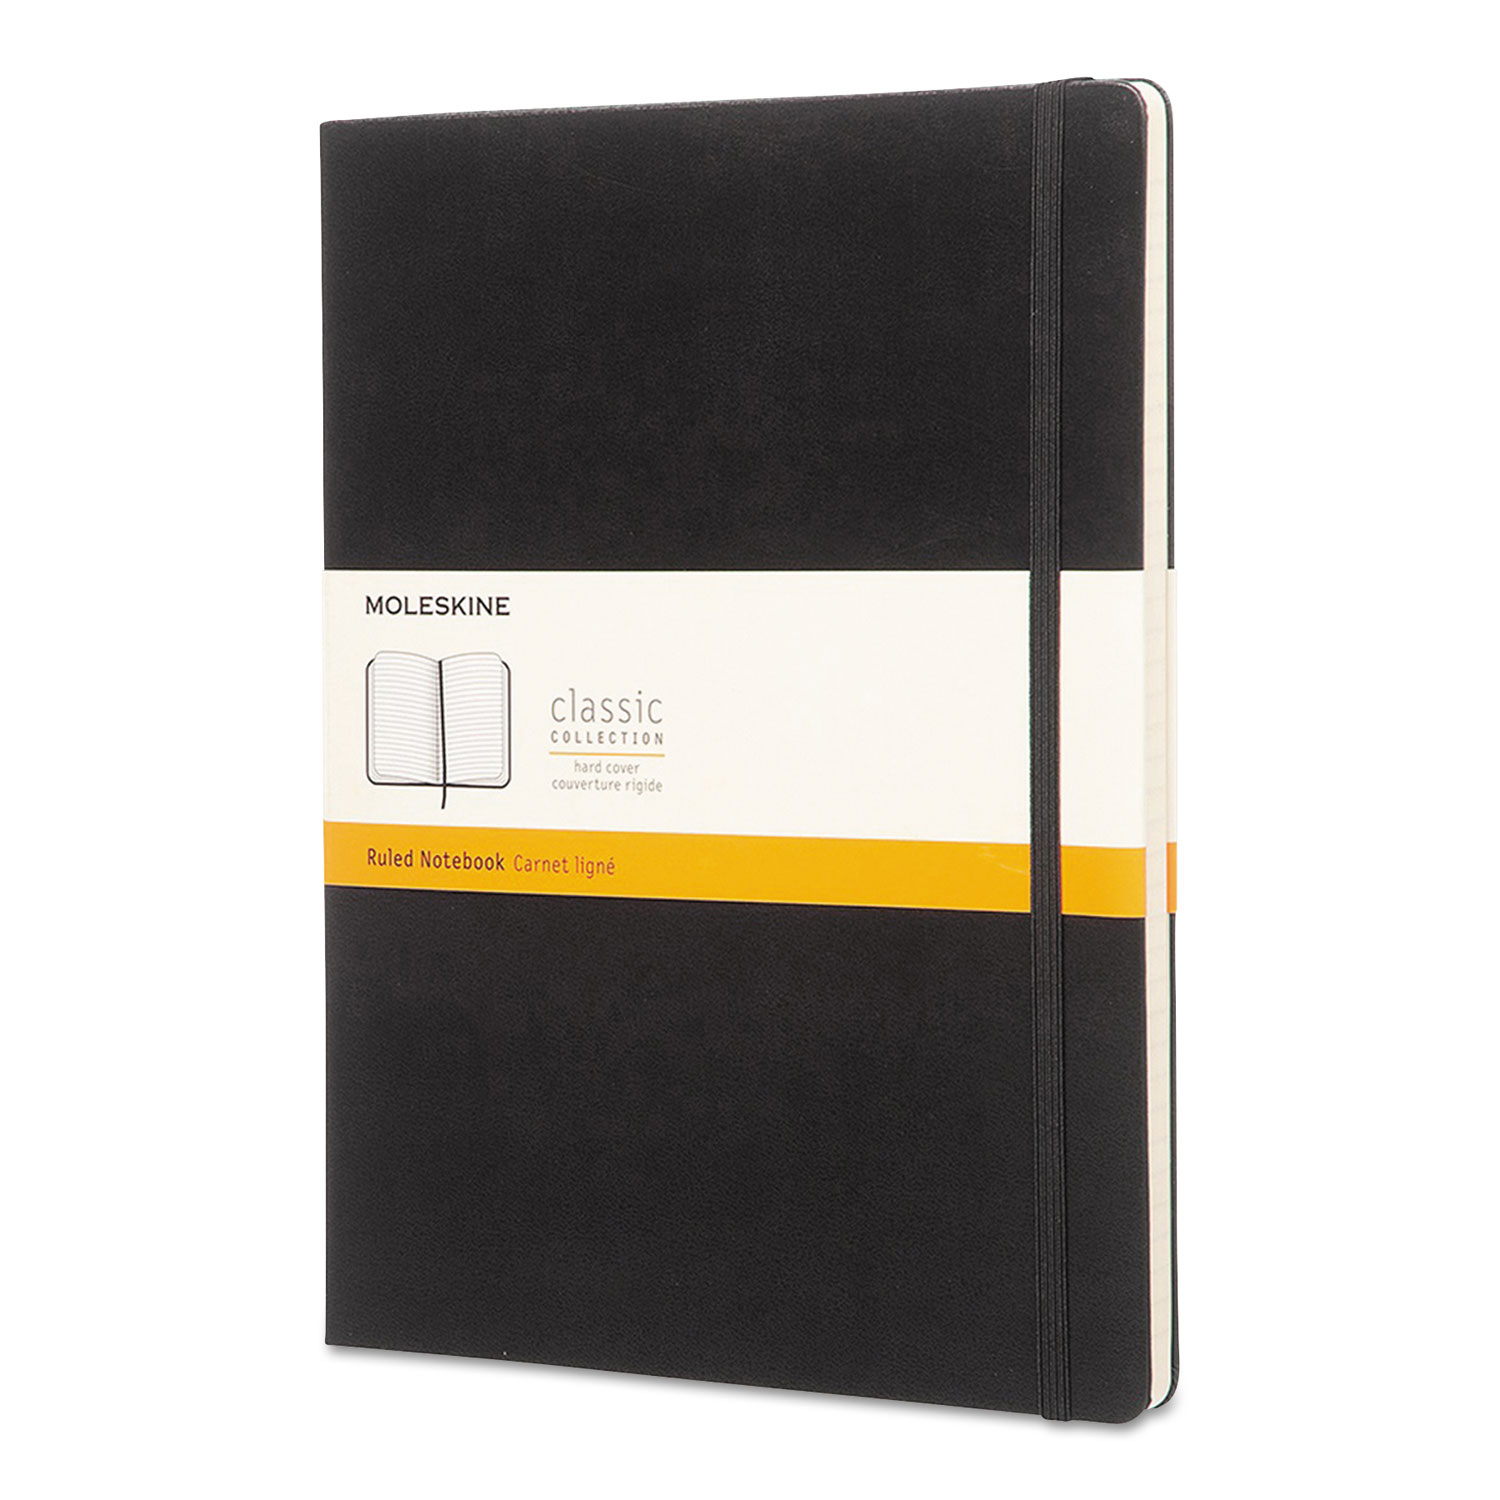  Moleskine 323067 Classic Colored Hardcover Notebook, Narrow Rule, Black, 10 x 7.5, 192 Sheets (HBGQP090) 